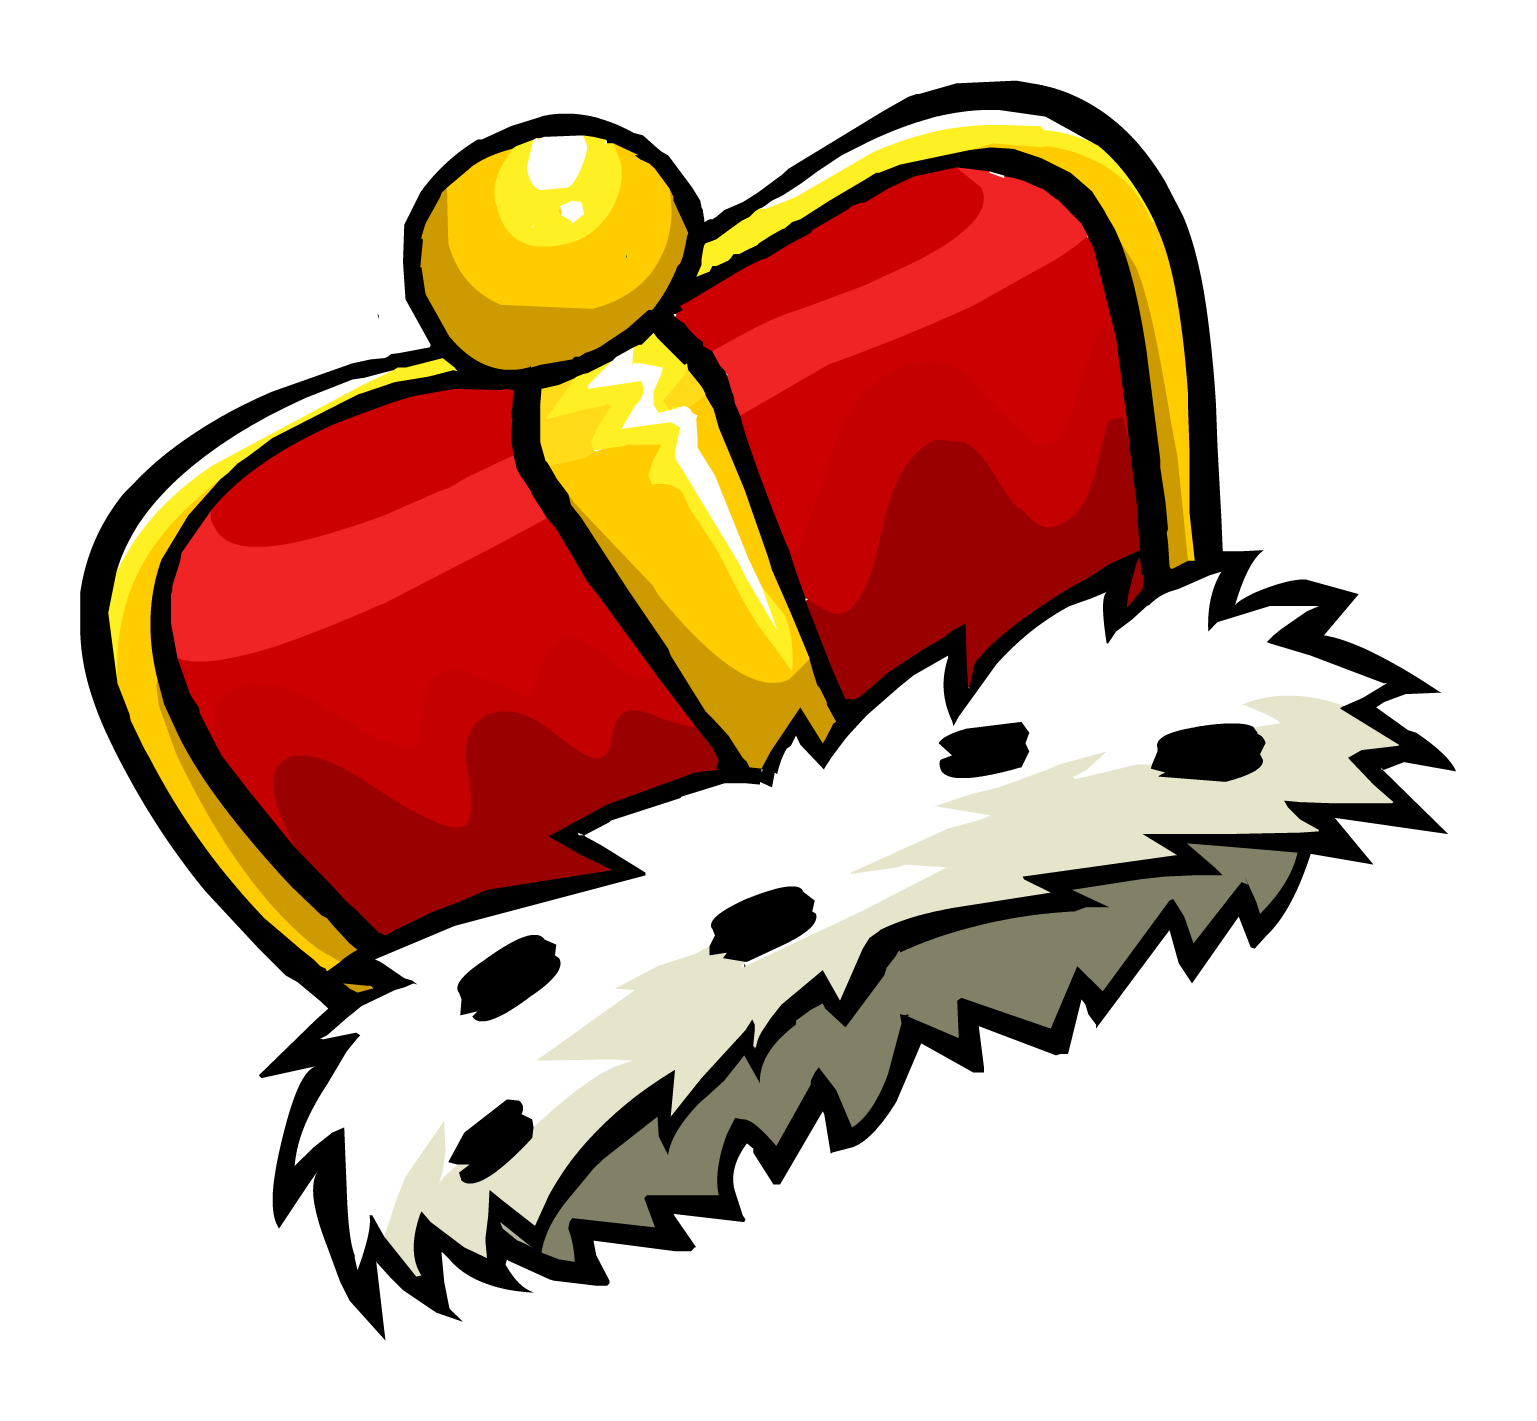 King's Crown Pin - Club Penguin Wiki - The free, editable ...